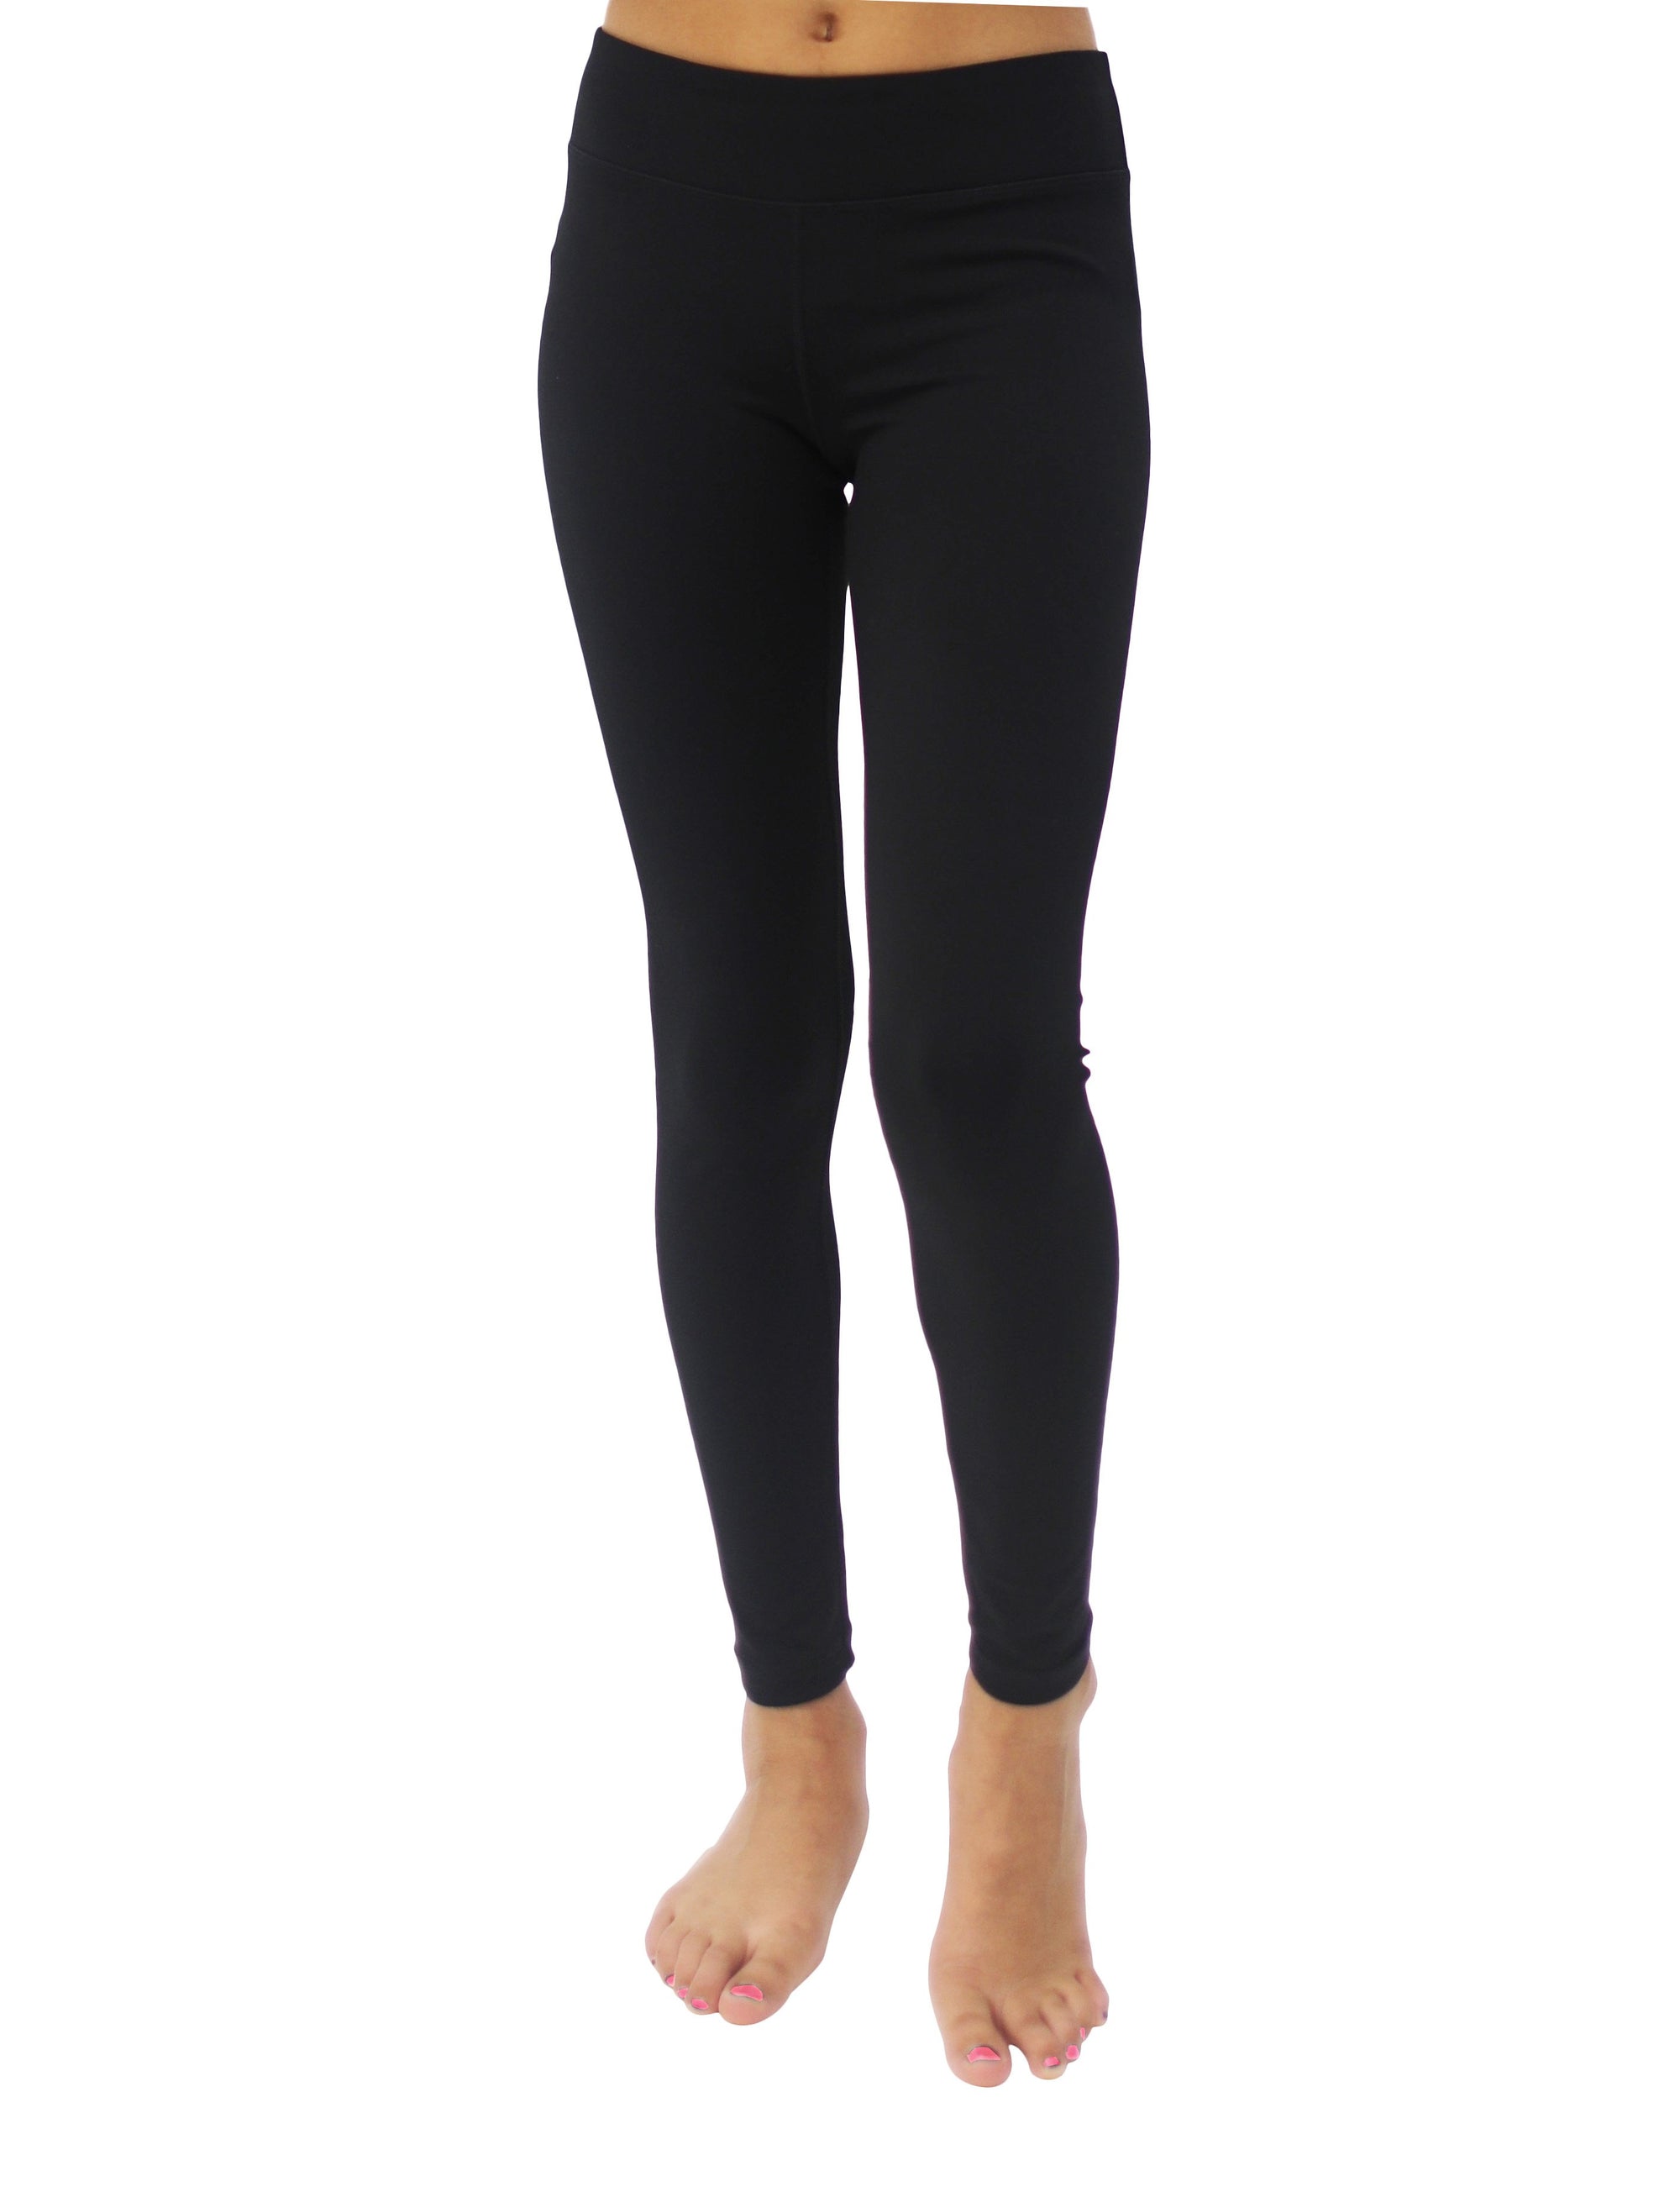 90 Degrees By Reflex Womens Black Athletic Leggings With Texture Small